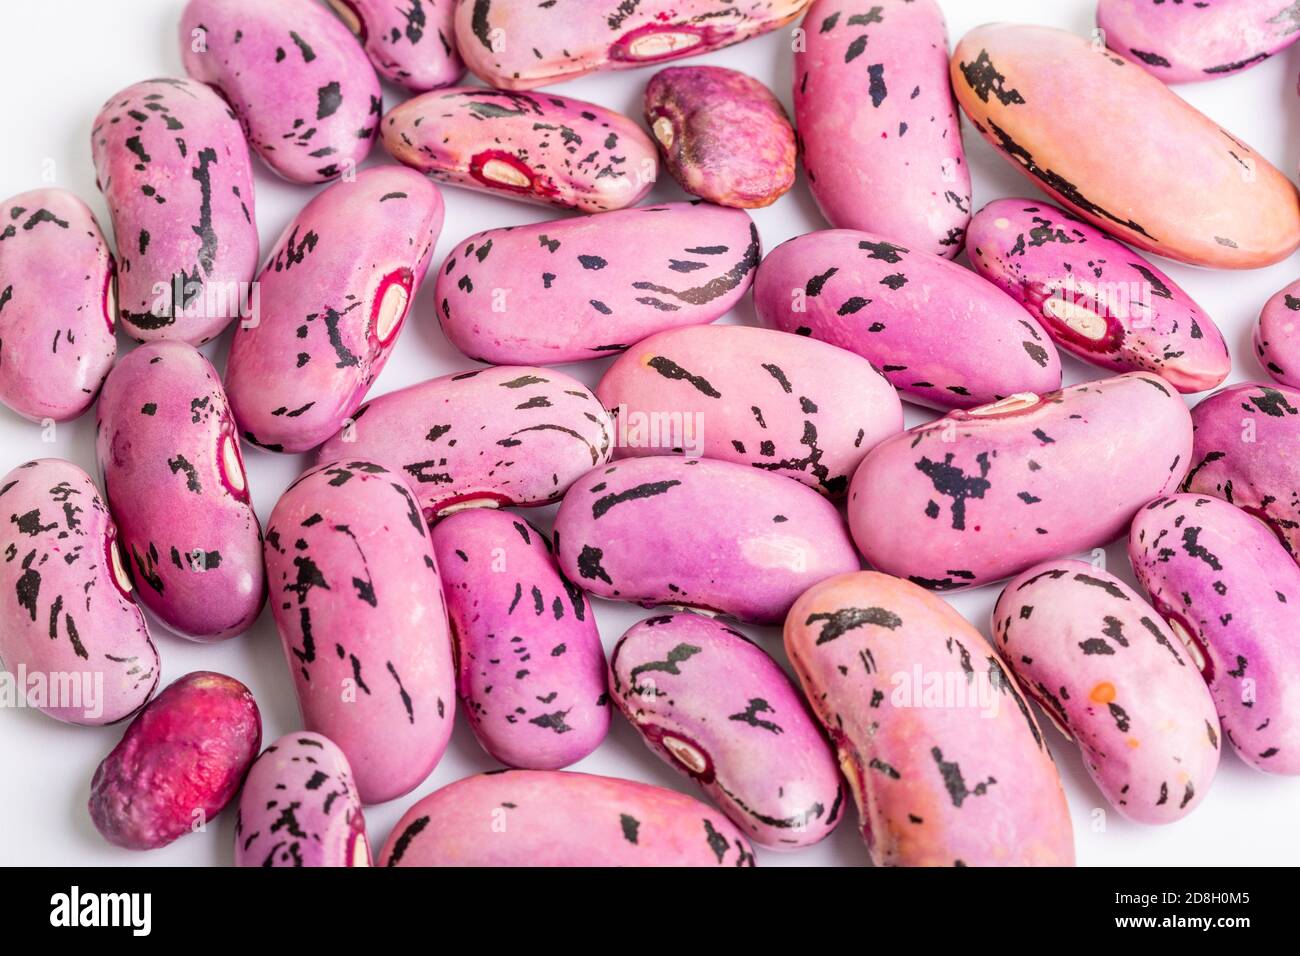 Lots of borlotti beans. These beans were grown in our allotment in Edinburgh, Scotland and left to dry, so they can be seeds for next year. Stock Photo